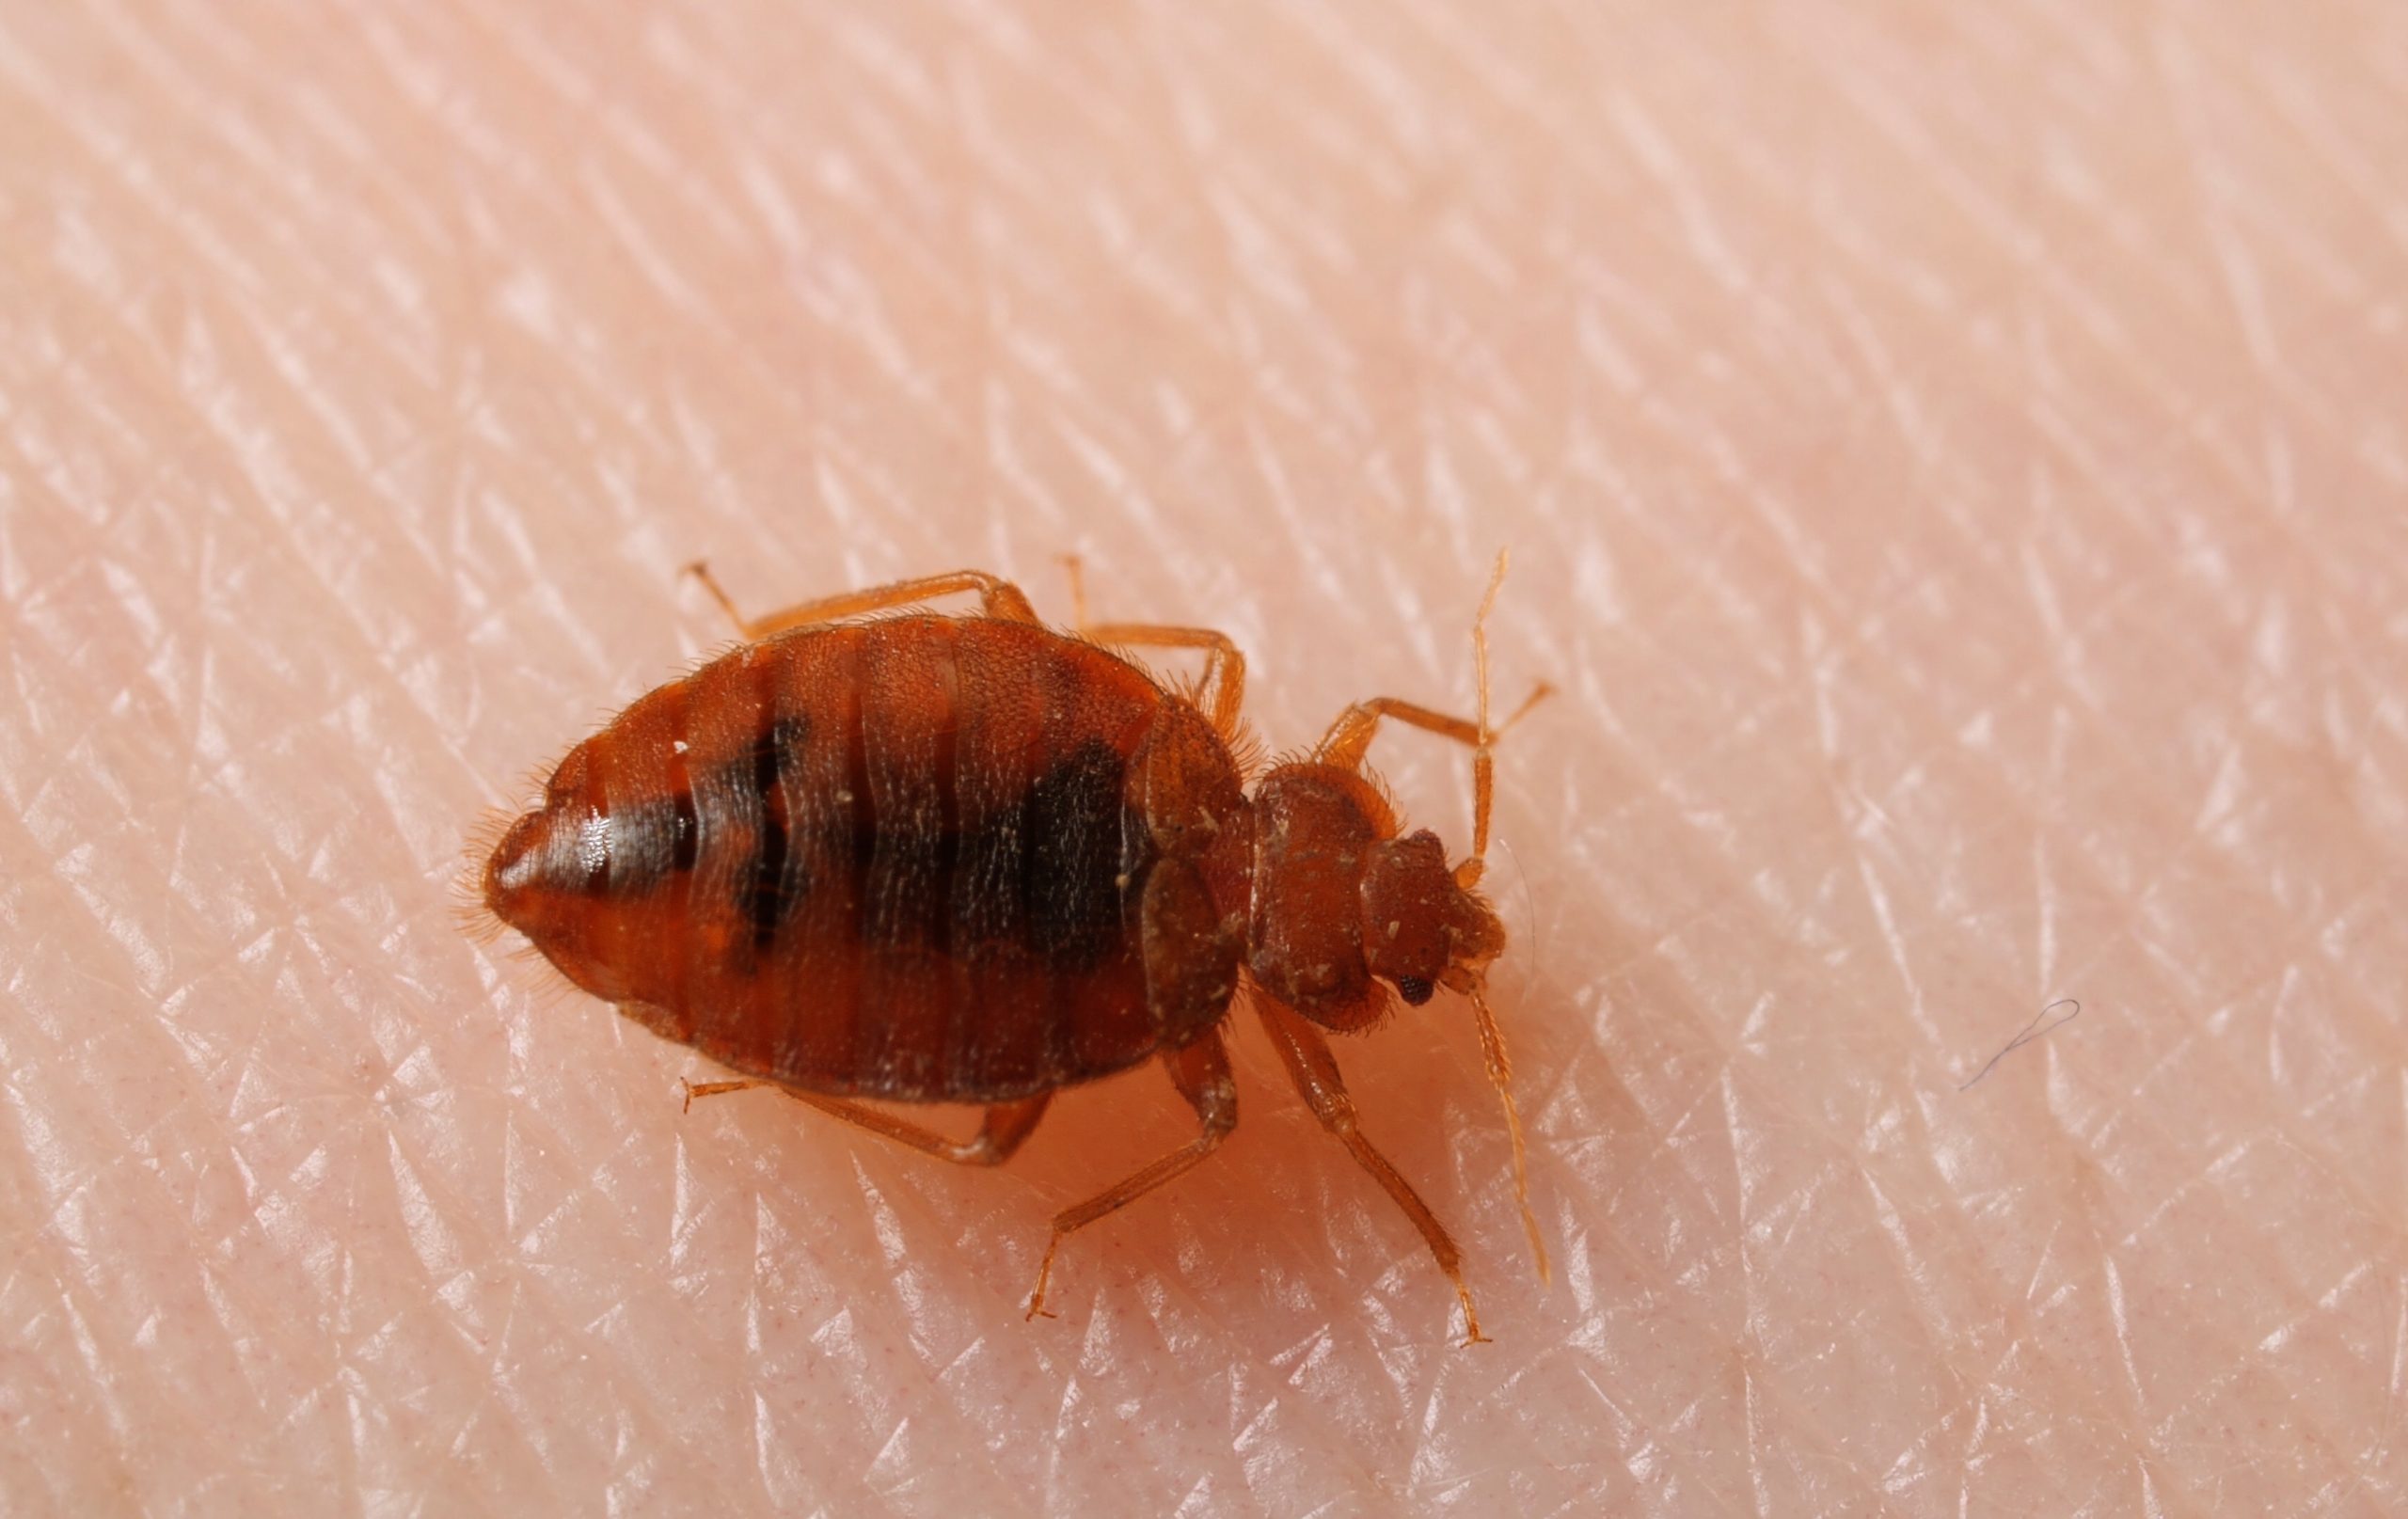 How Do Bed Bugs Affect Your Health?